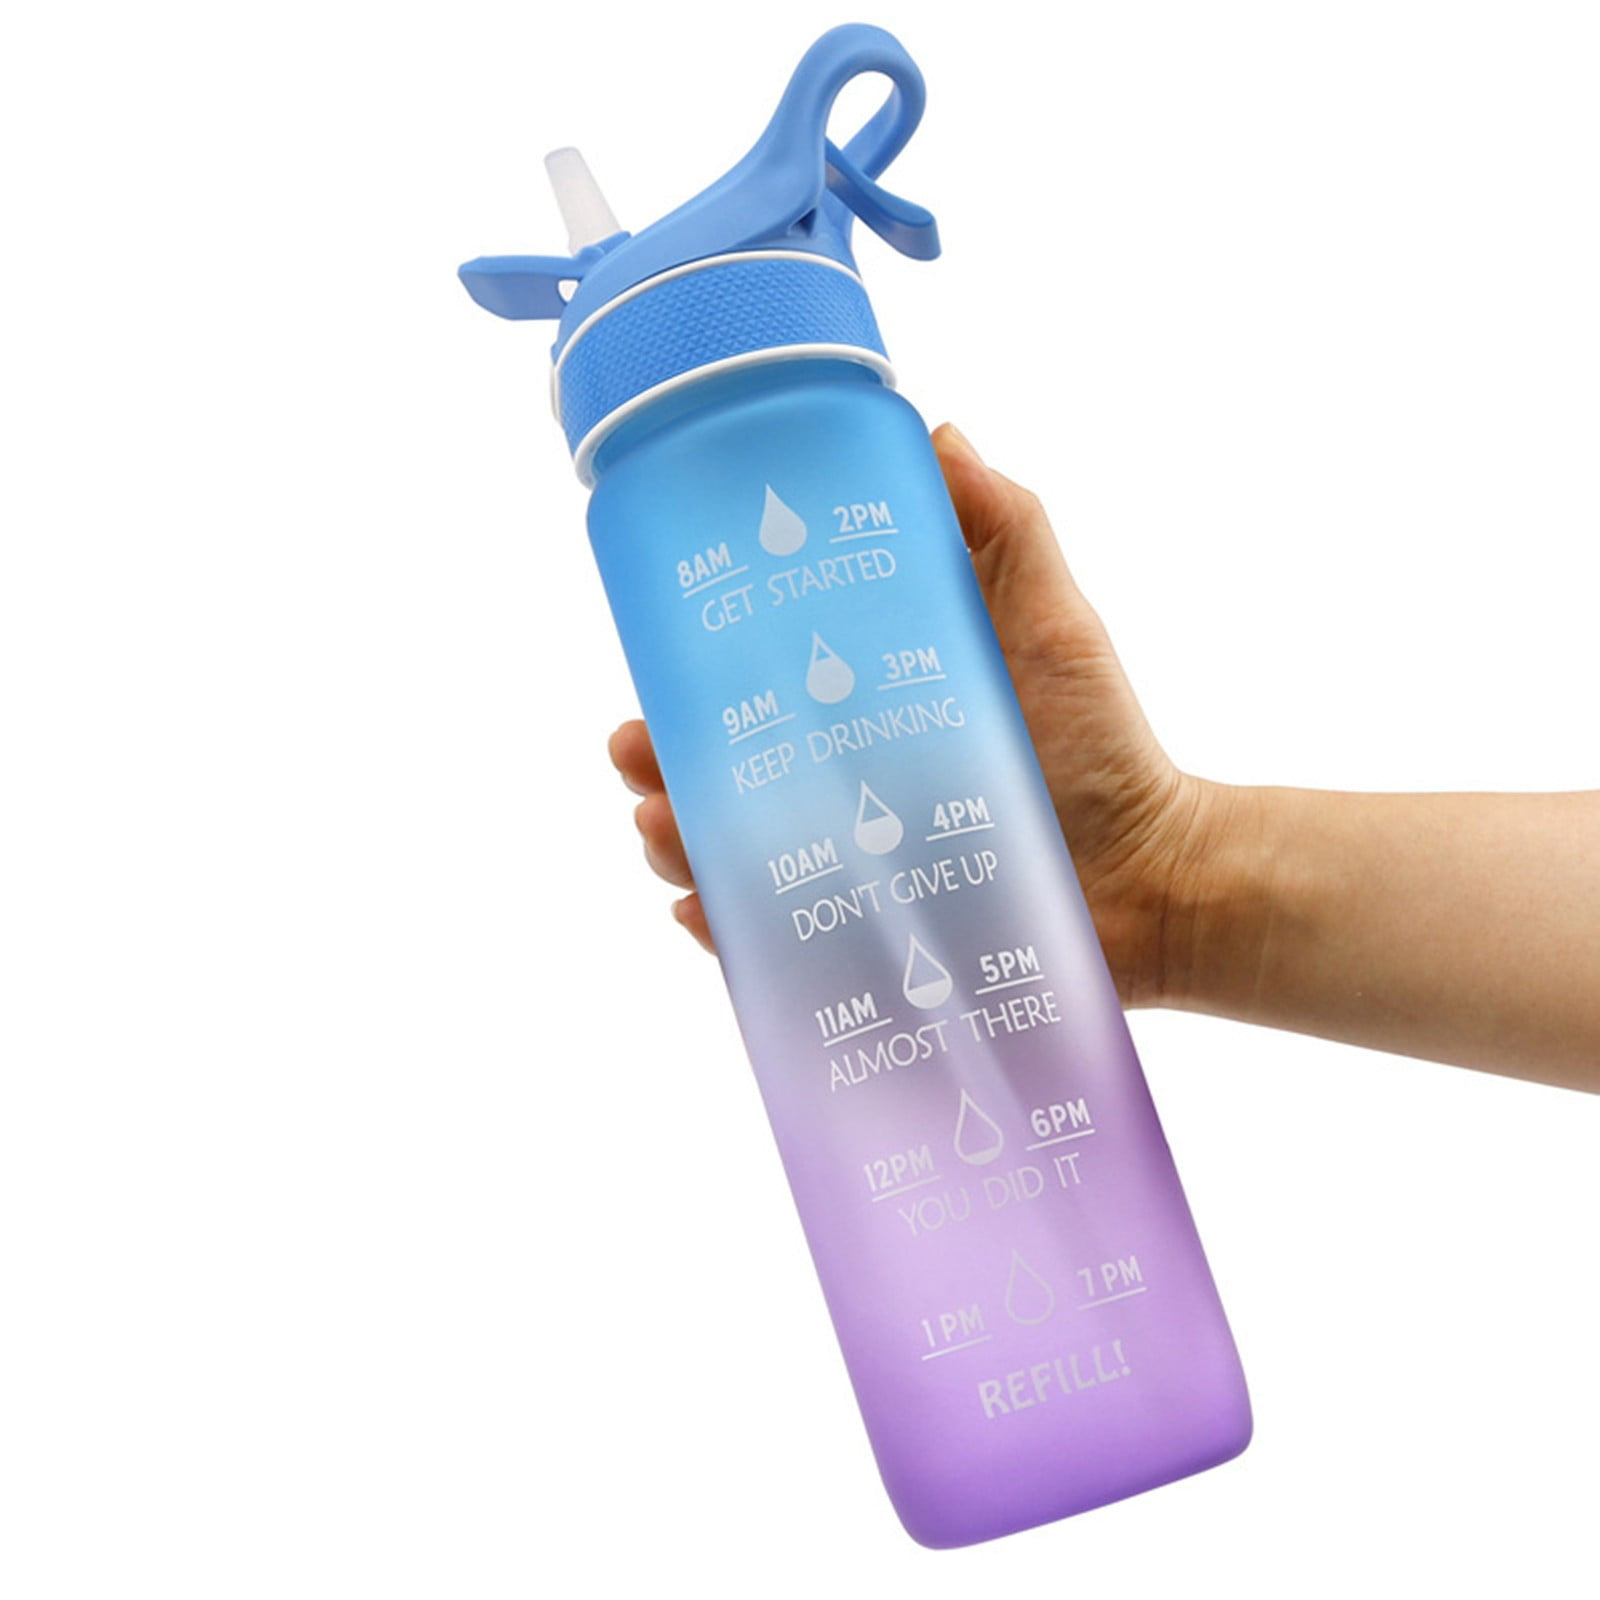 Motivational Water Bottle For Girls 2L Capacity With Time Marker, Straw,  And Portable Design Perfect For Sports, Gym, And More By Botella De Agua.  From Ning09, $10.28